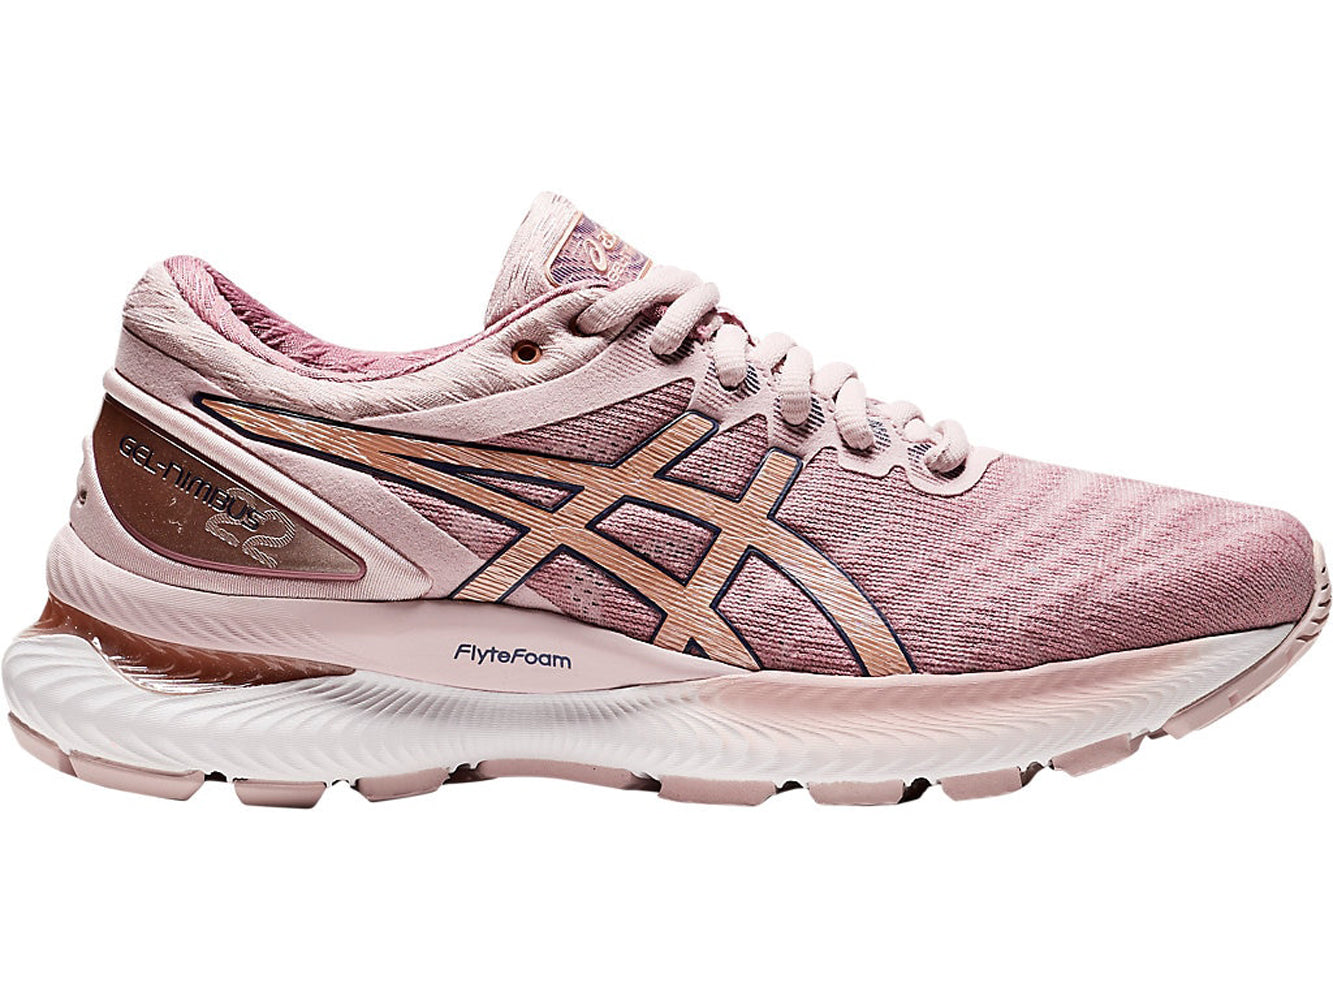 Women's Asics GEL-Nimbus 22 Running Shoe in Watershed Rose/Rose Gold from the side